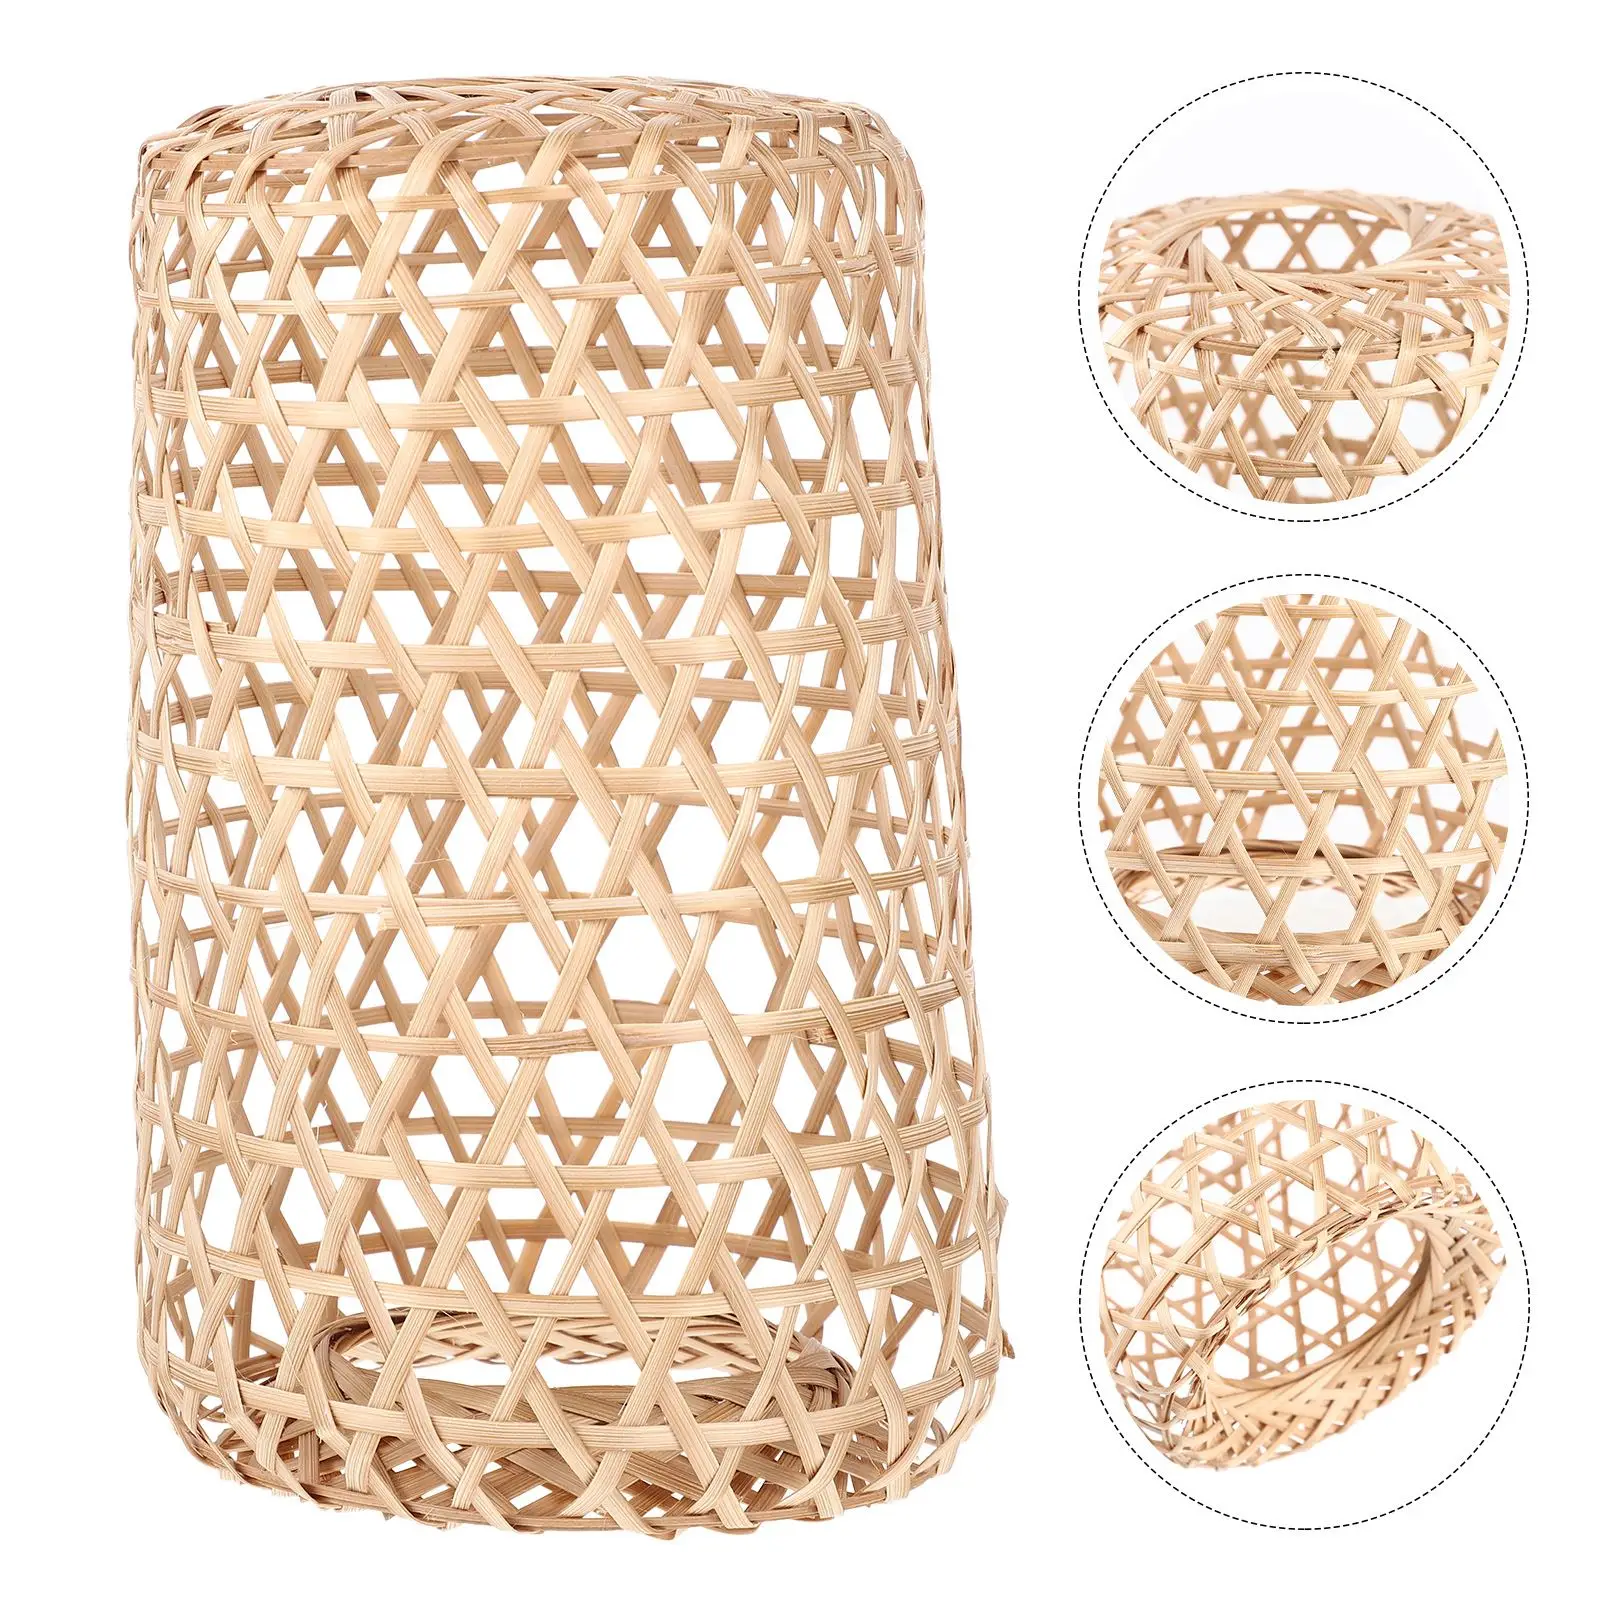 

Shade Lamp Light Rattan Wicker Shades Woven Ceiling Cover Pendant Chandelier Lampshade Wall Drum Table Hanging Sconce Bulb